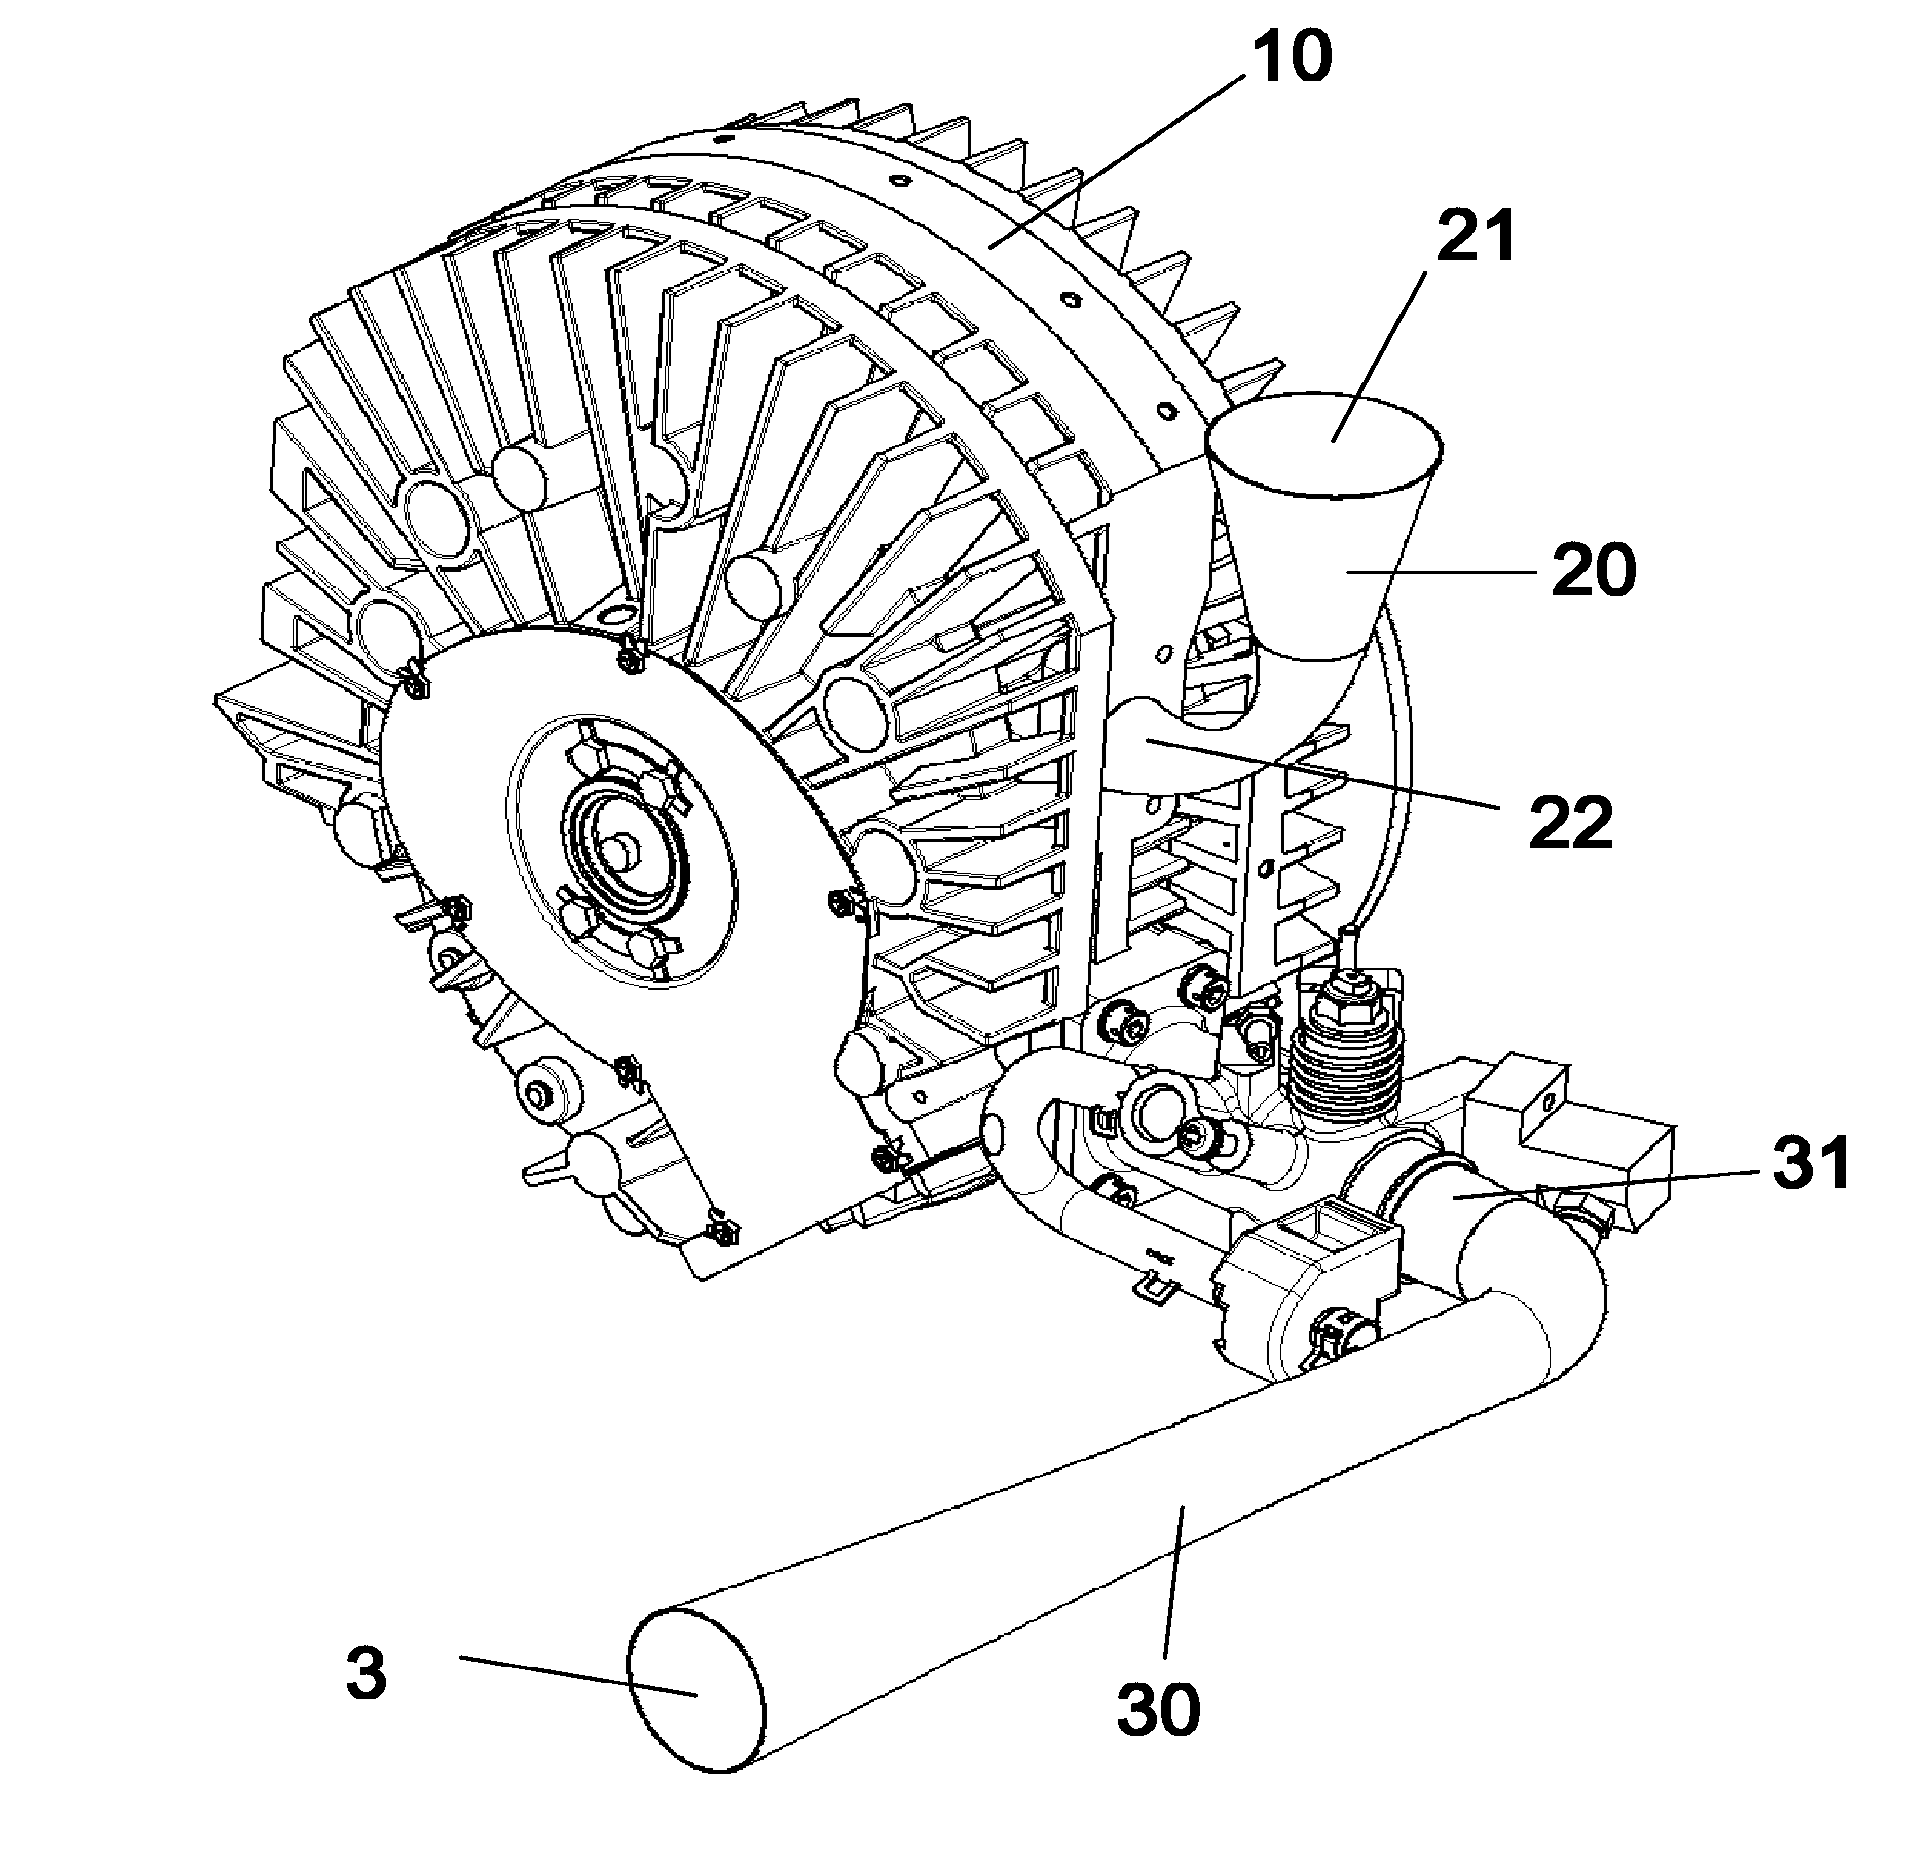 Intake/outlet pipe optimization method for rotary engine